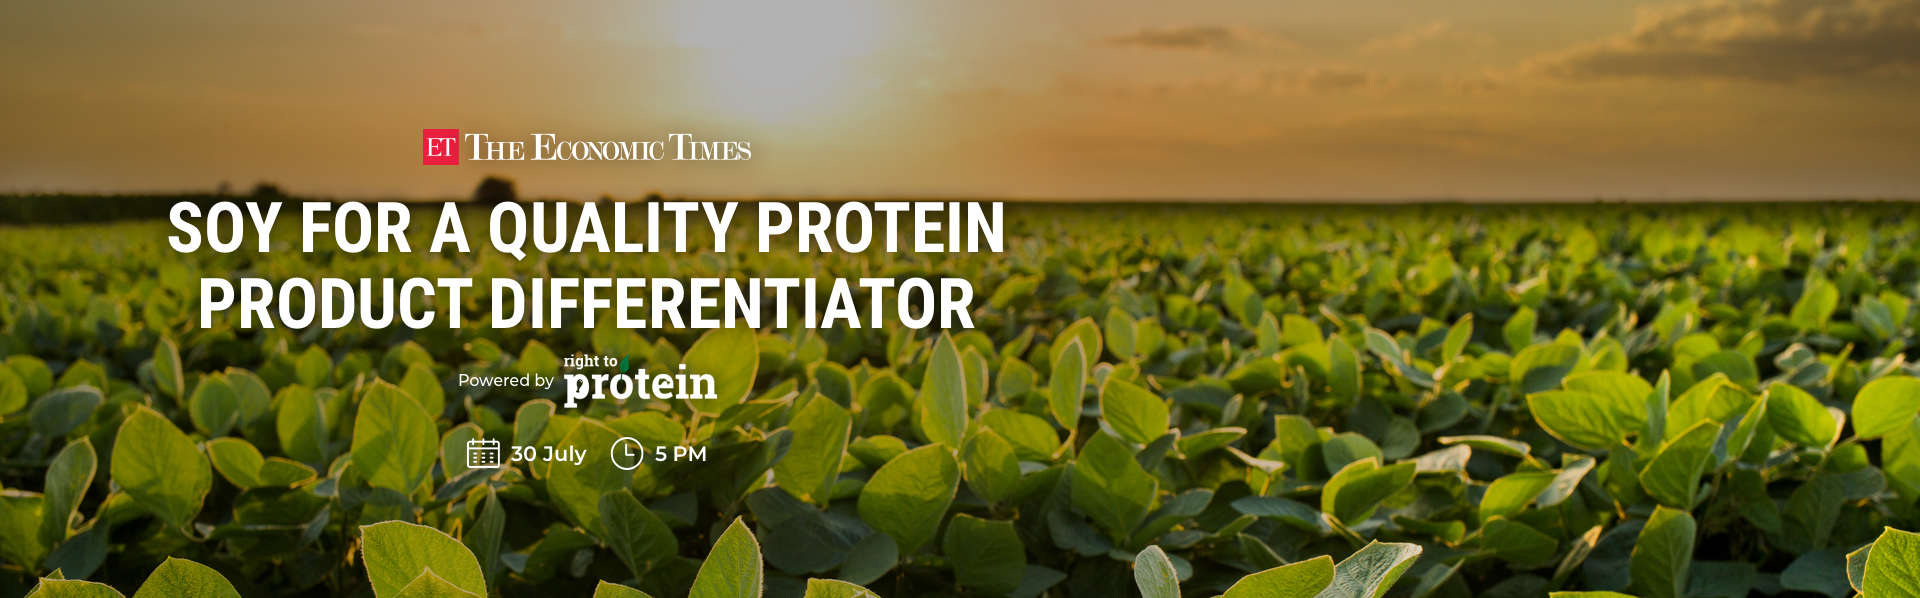 Soy for a Quality Protein Product Differentiator